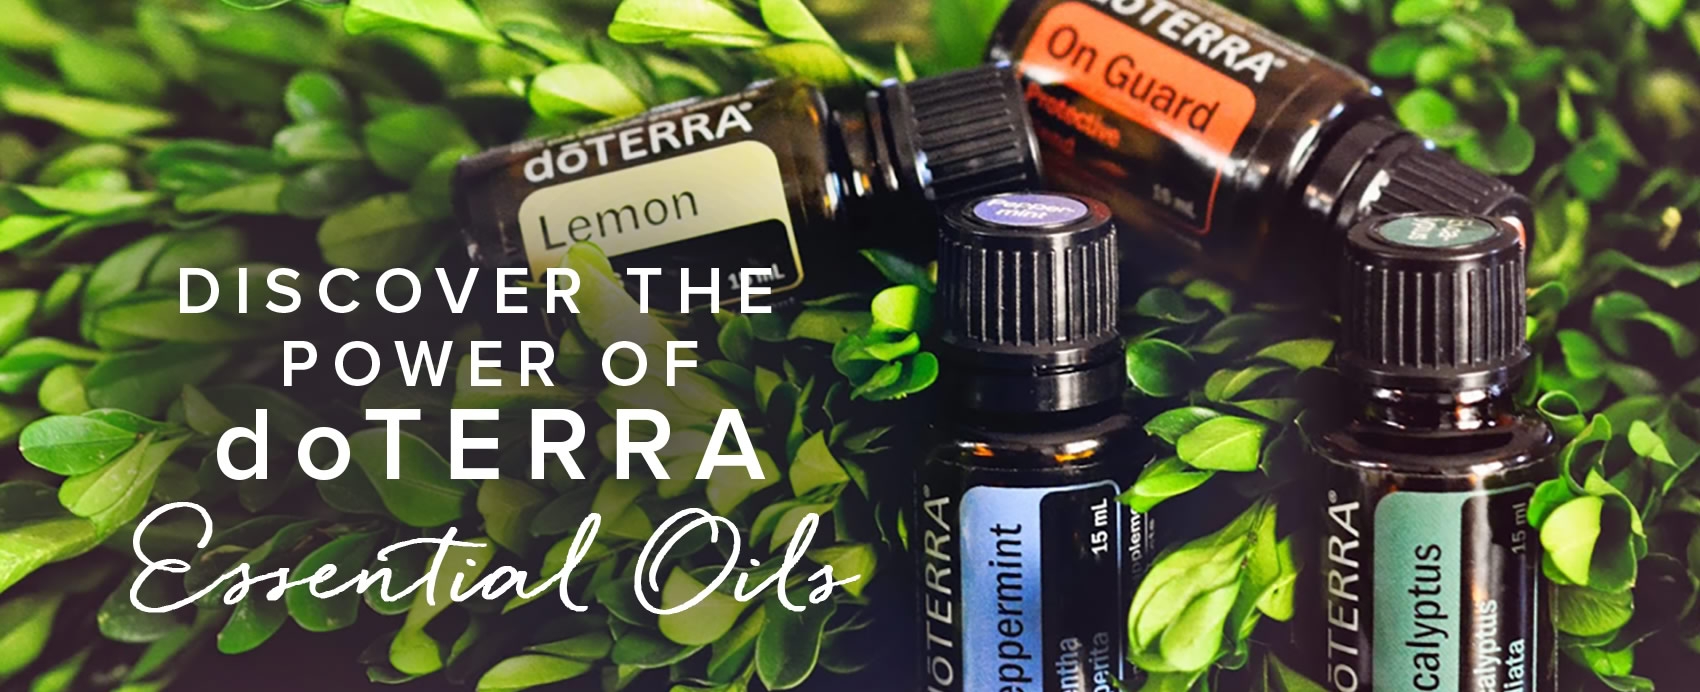 doTERRA Products | Many Income Streams